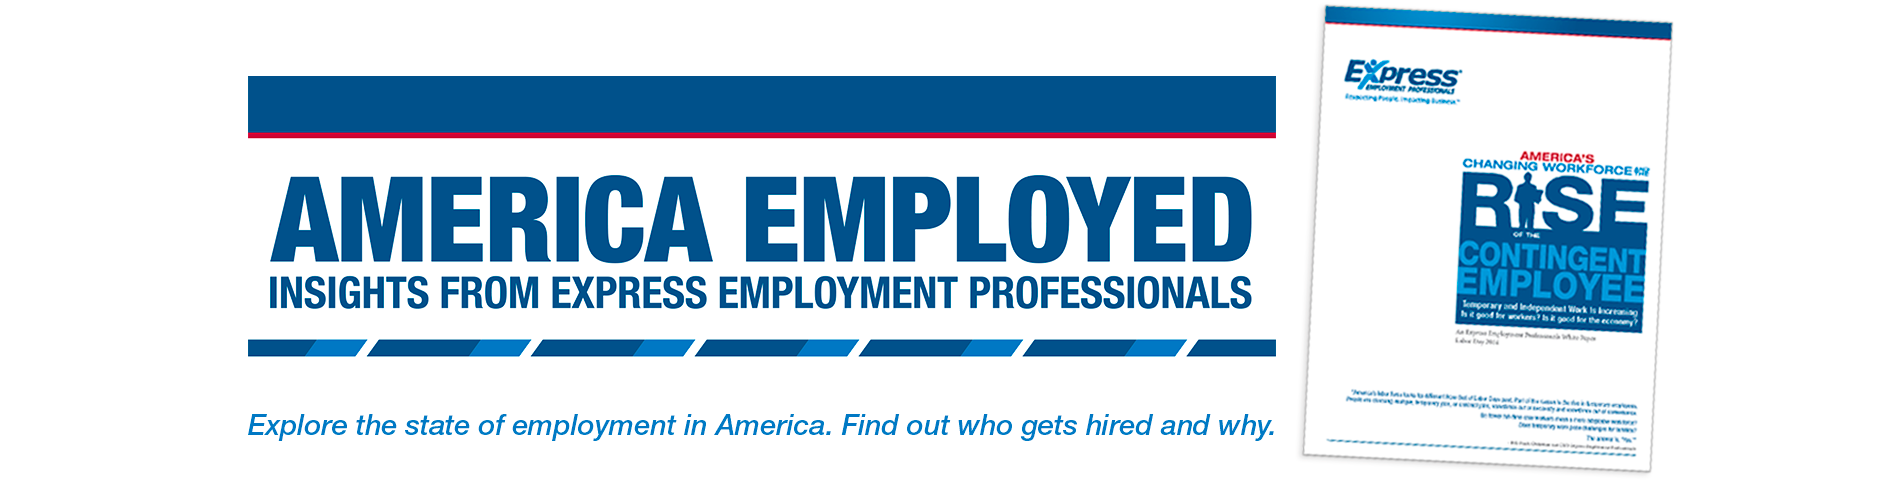 America Employed Home Page Banner Image